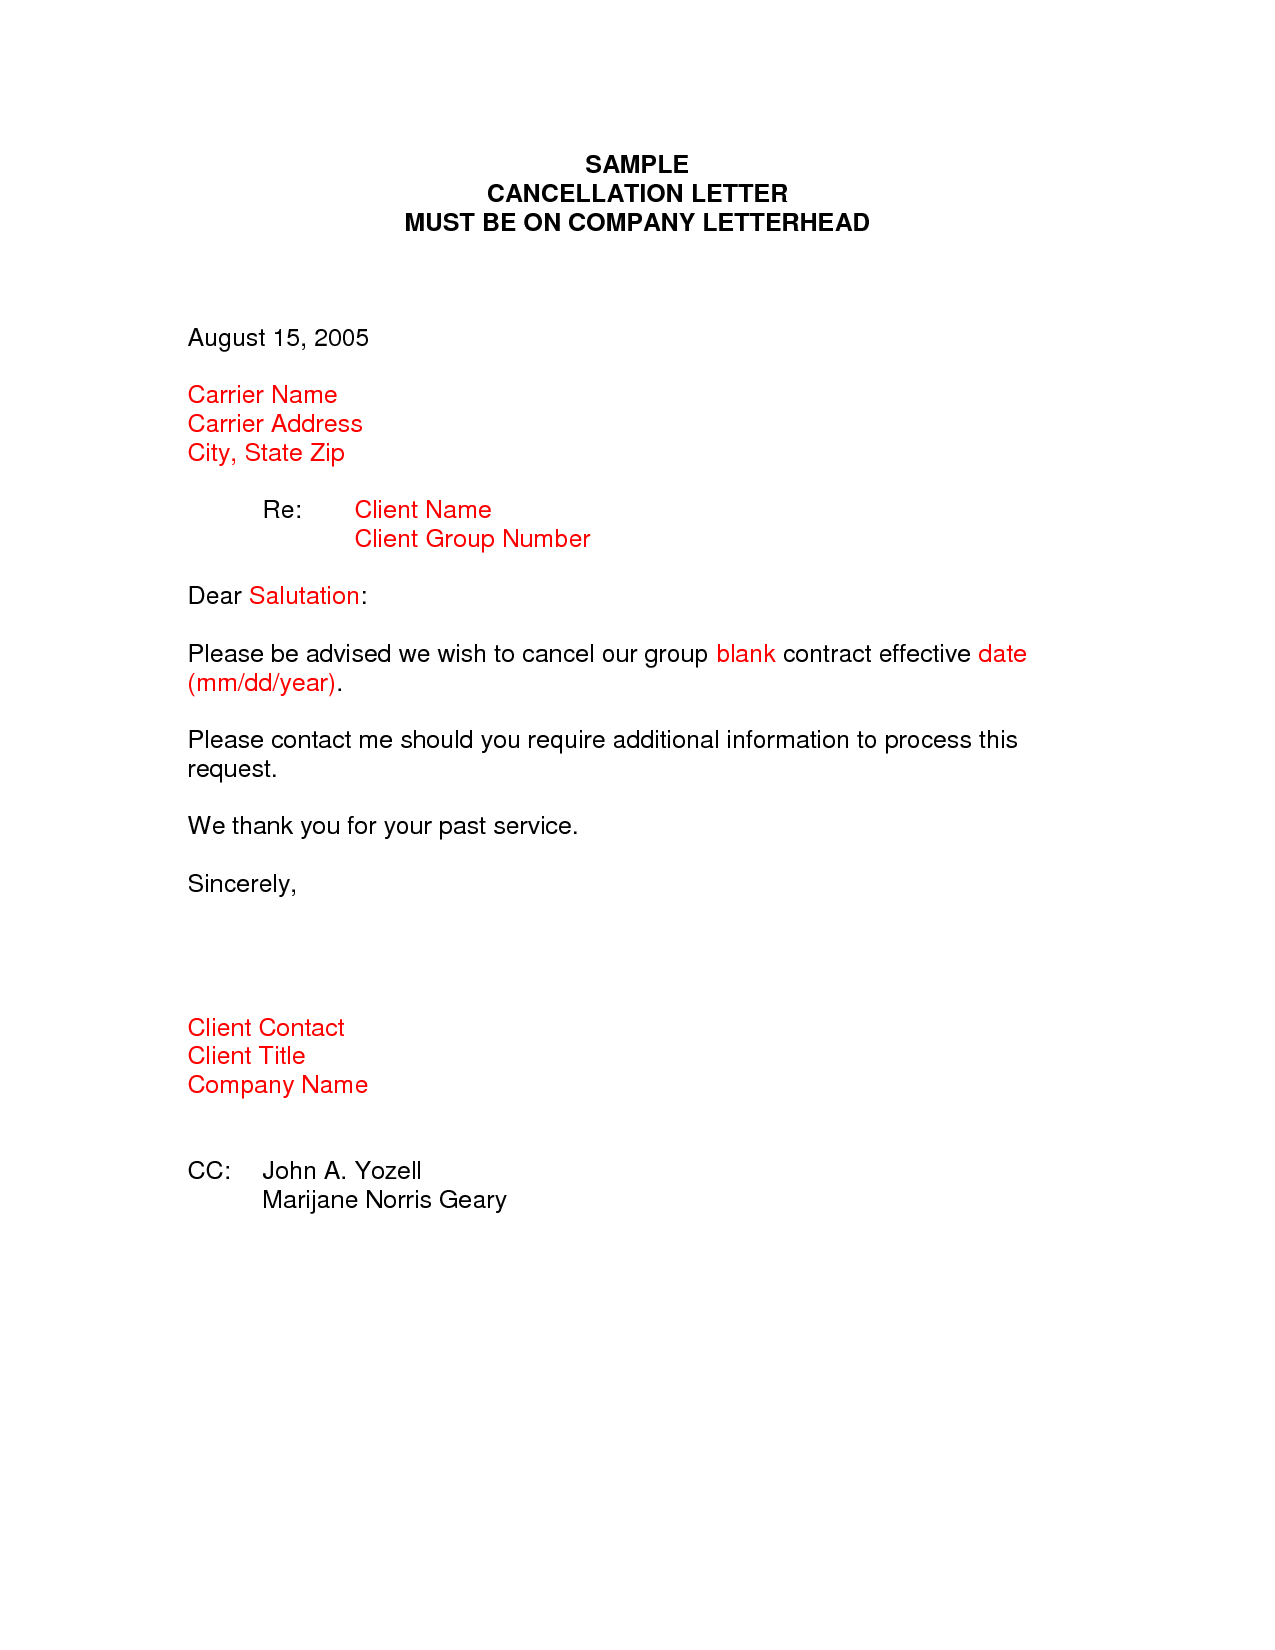 cancellation-letter-format-cancellation-letter-canceling-letters-gym